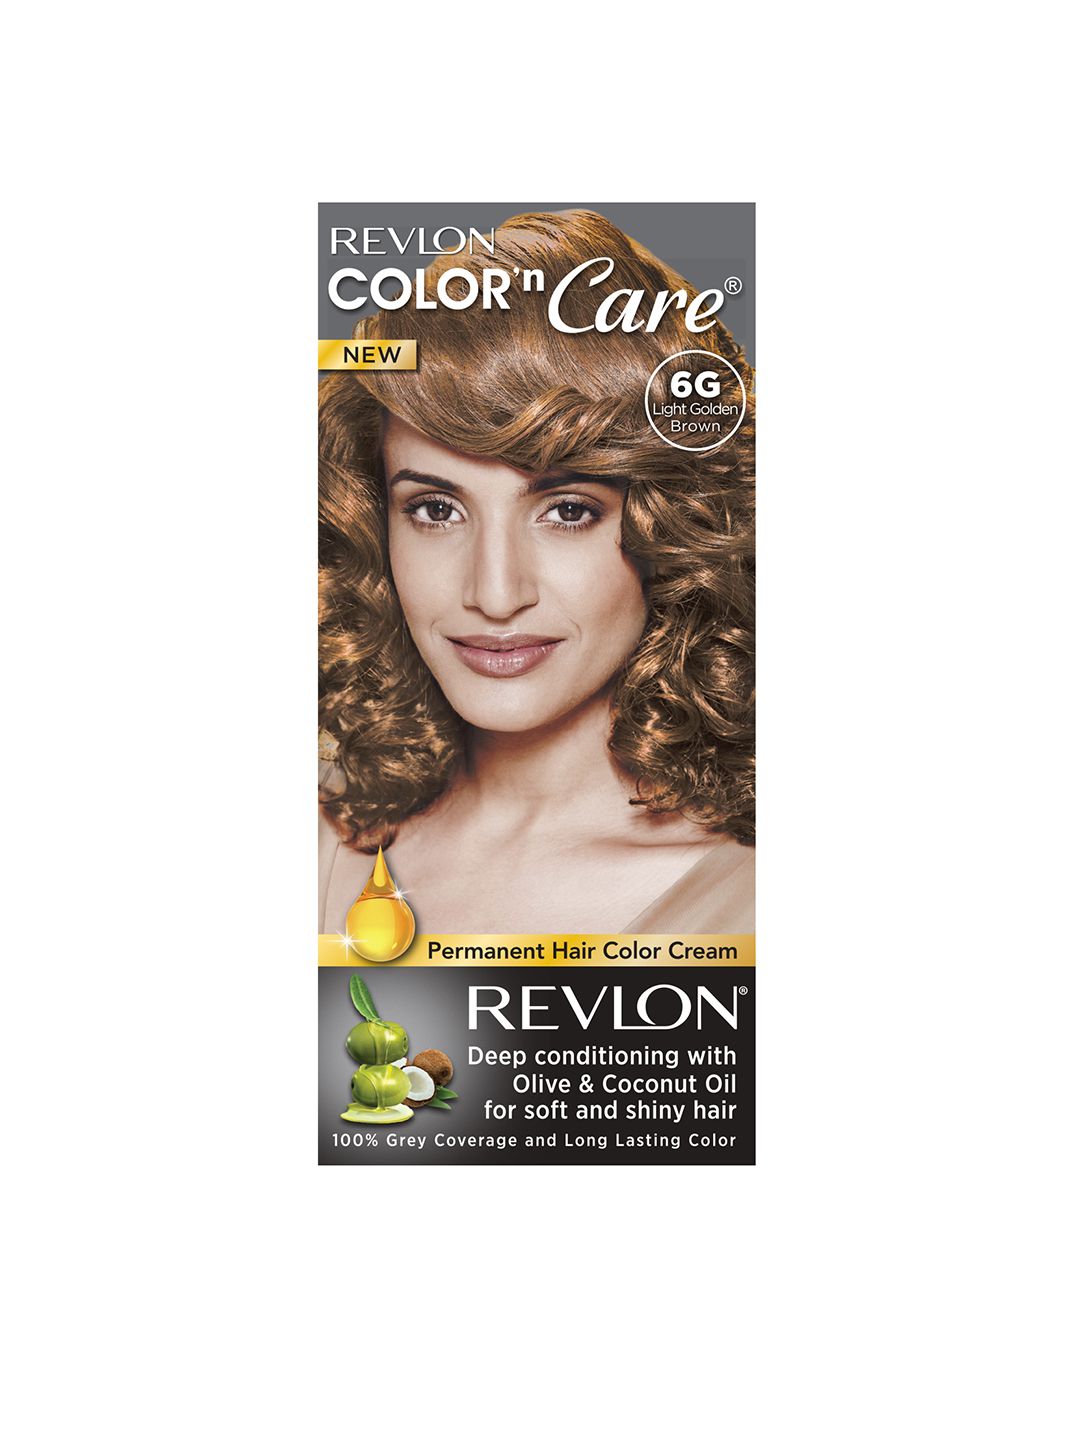 Revlon Color N Care Permanent Hair Color Cream - Light Golden Brown 6G Price in India